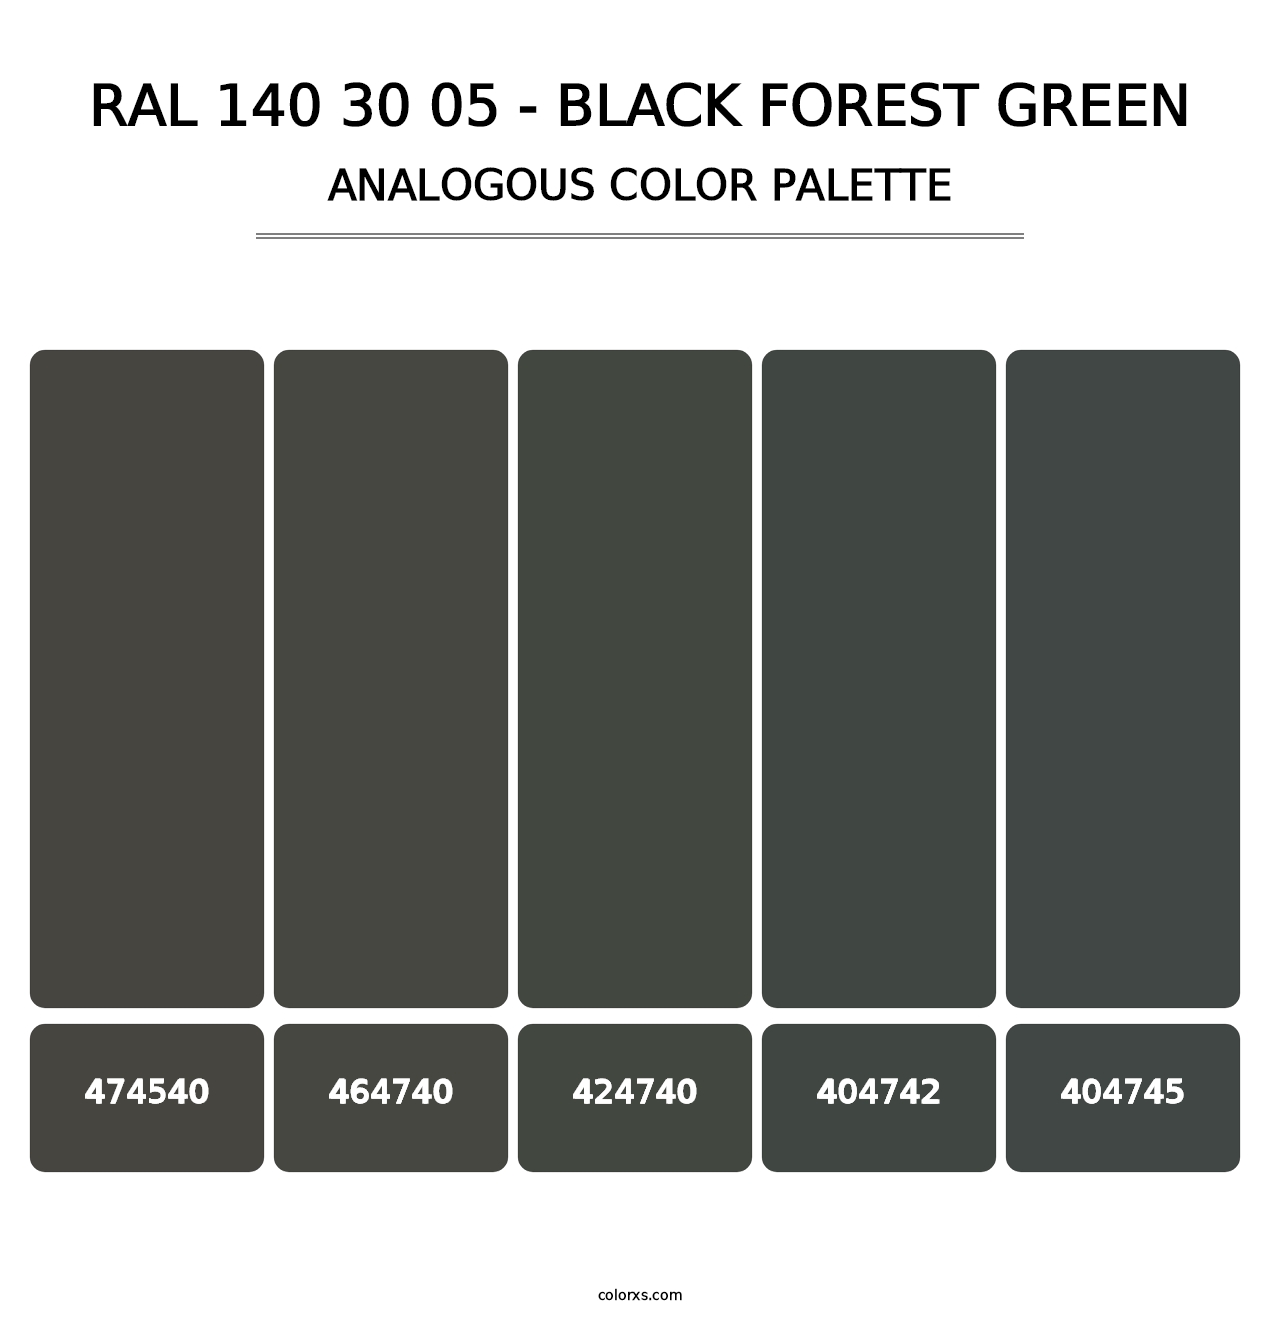 RAL 140 30 05 - Black Forest Green - Analogous Color Palette